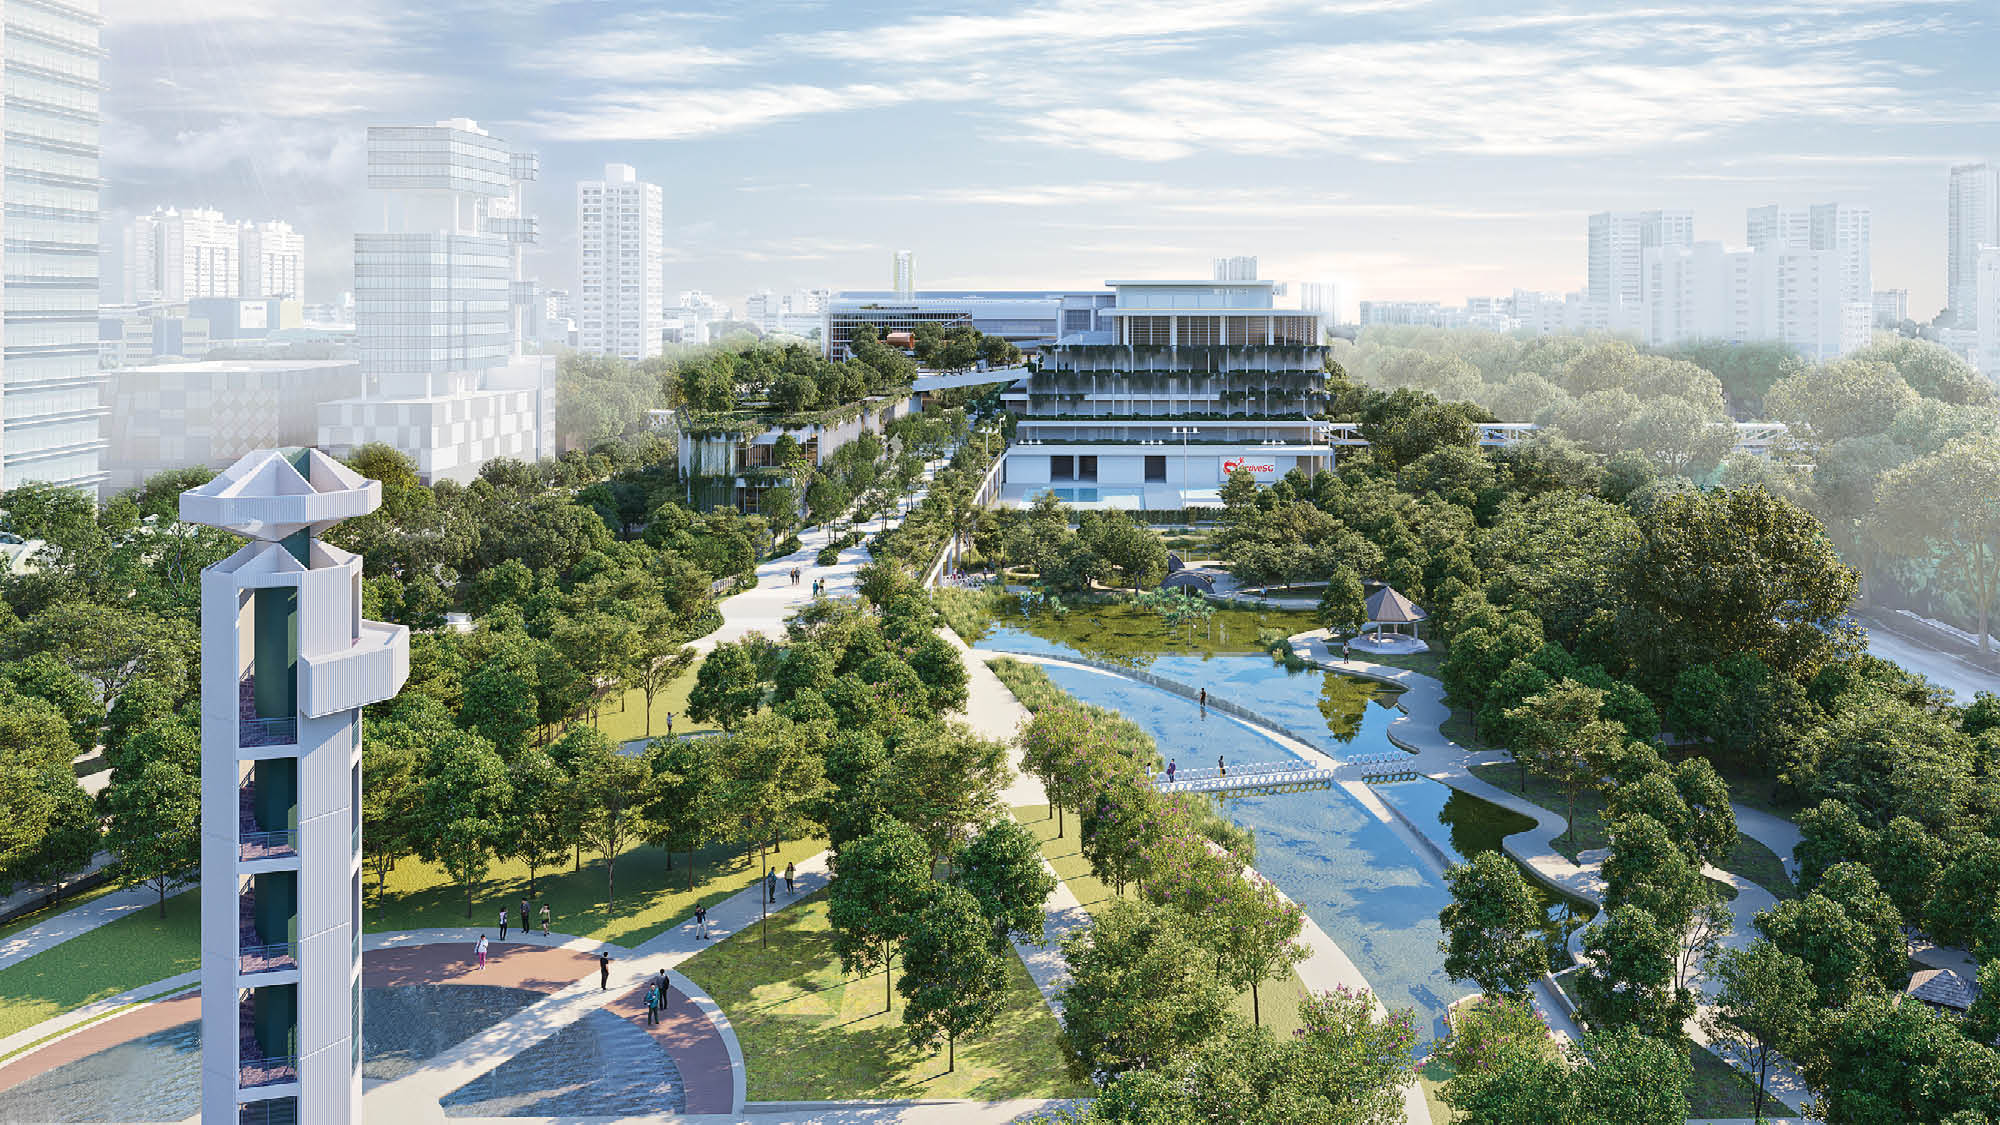 Illustration of future precinct with lake, green parks, sports venues, buildings and trees